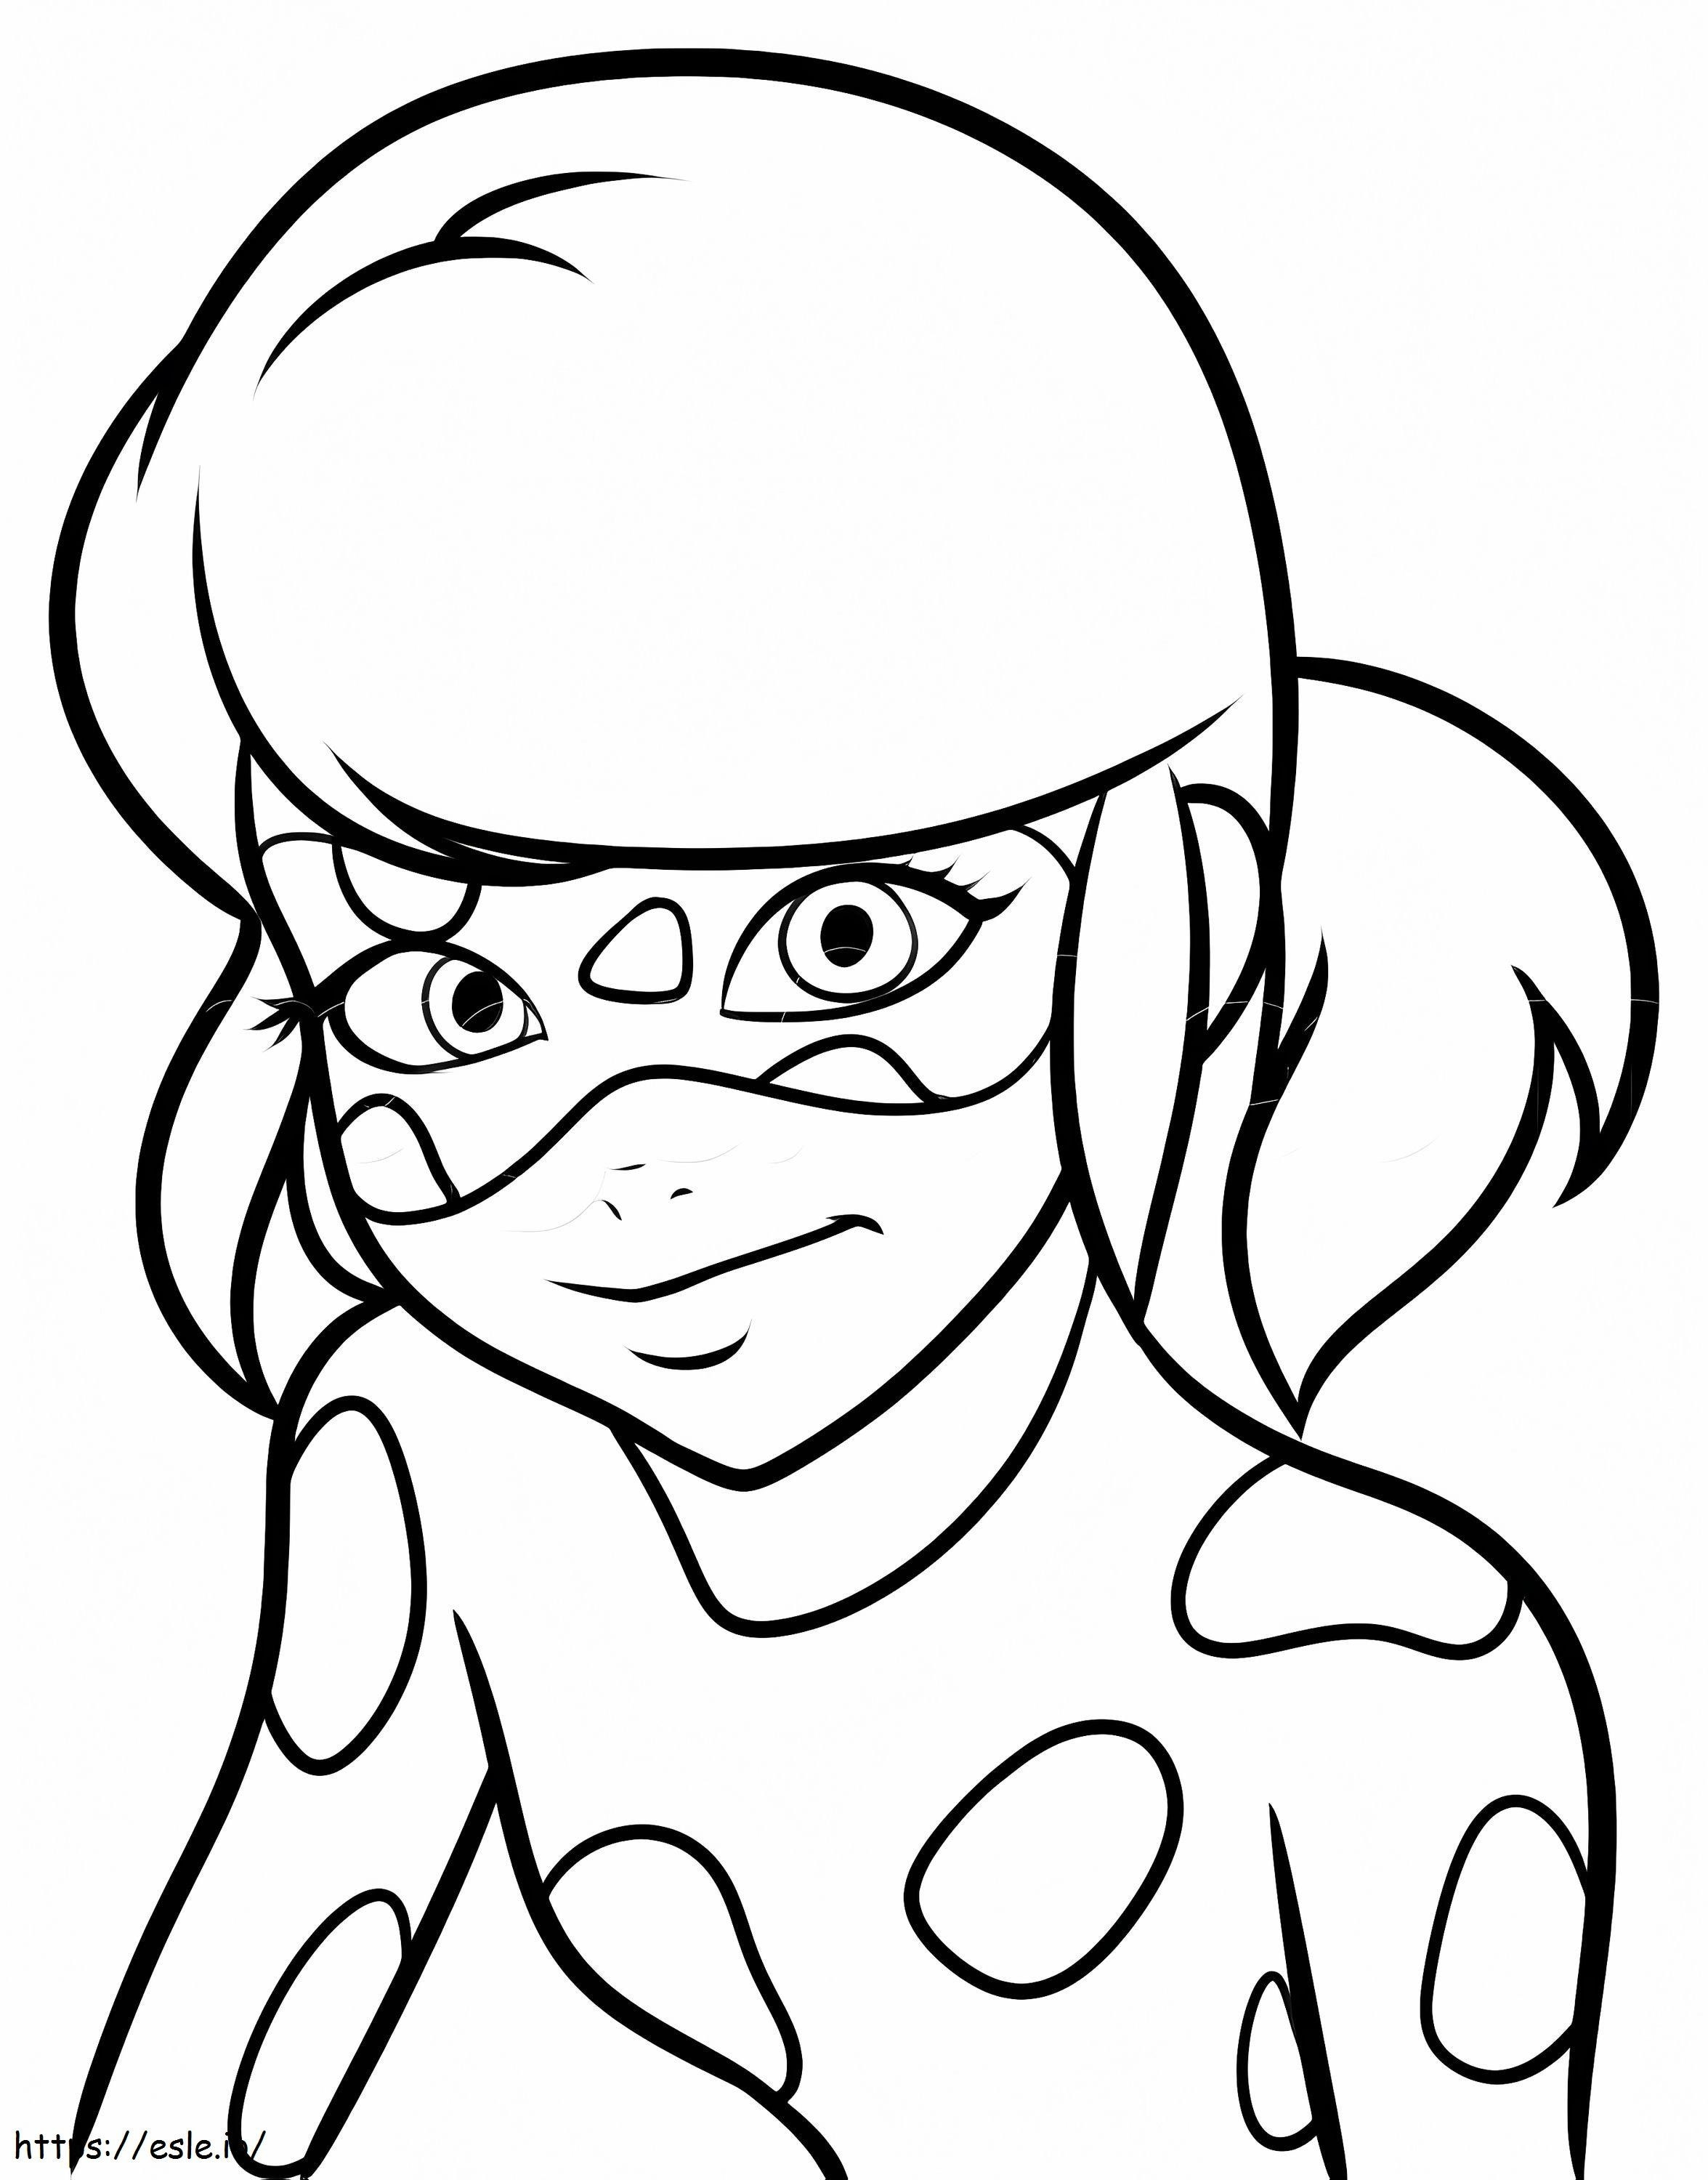 1531452757 Ladybug Smiling A4 coloring page